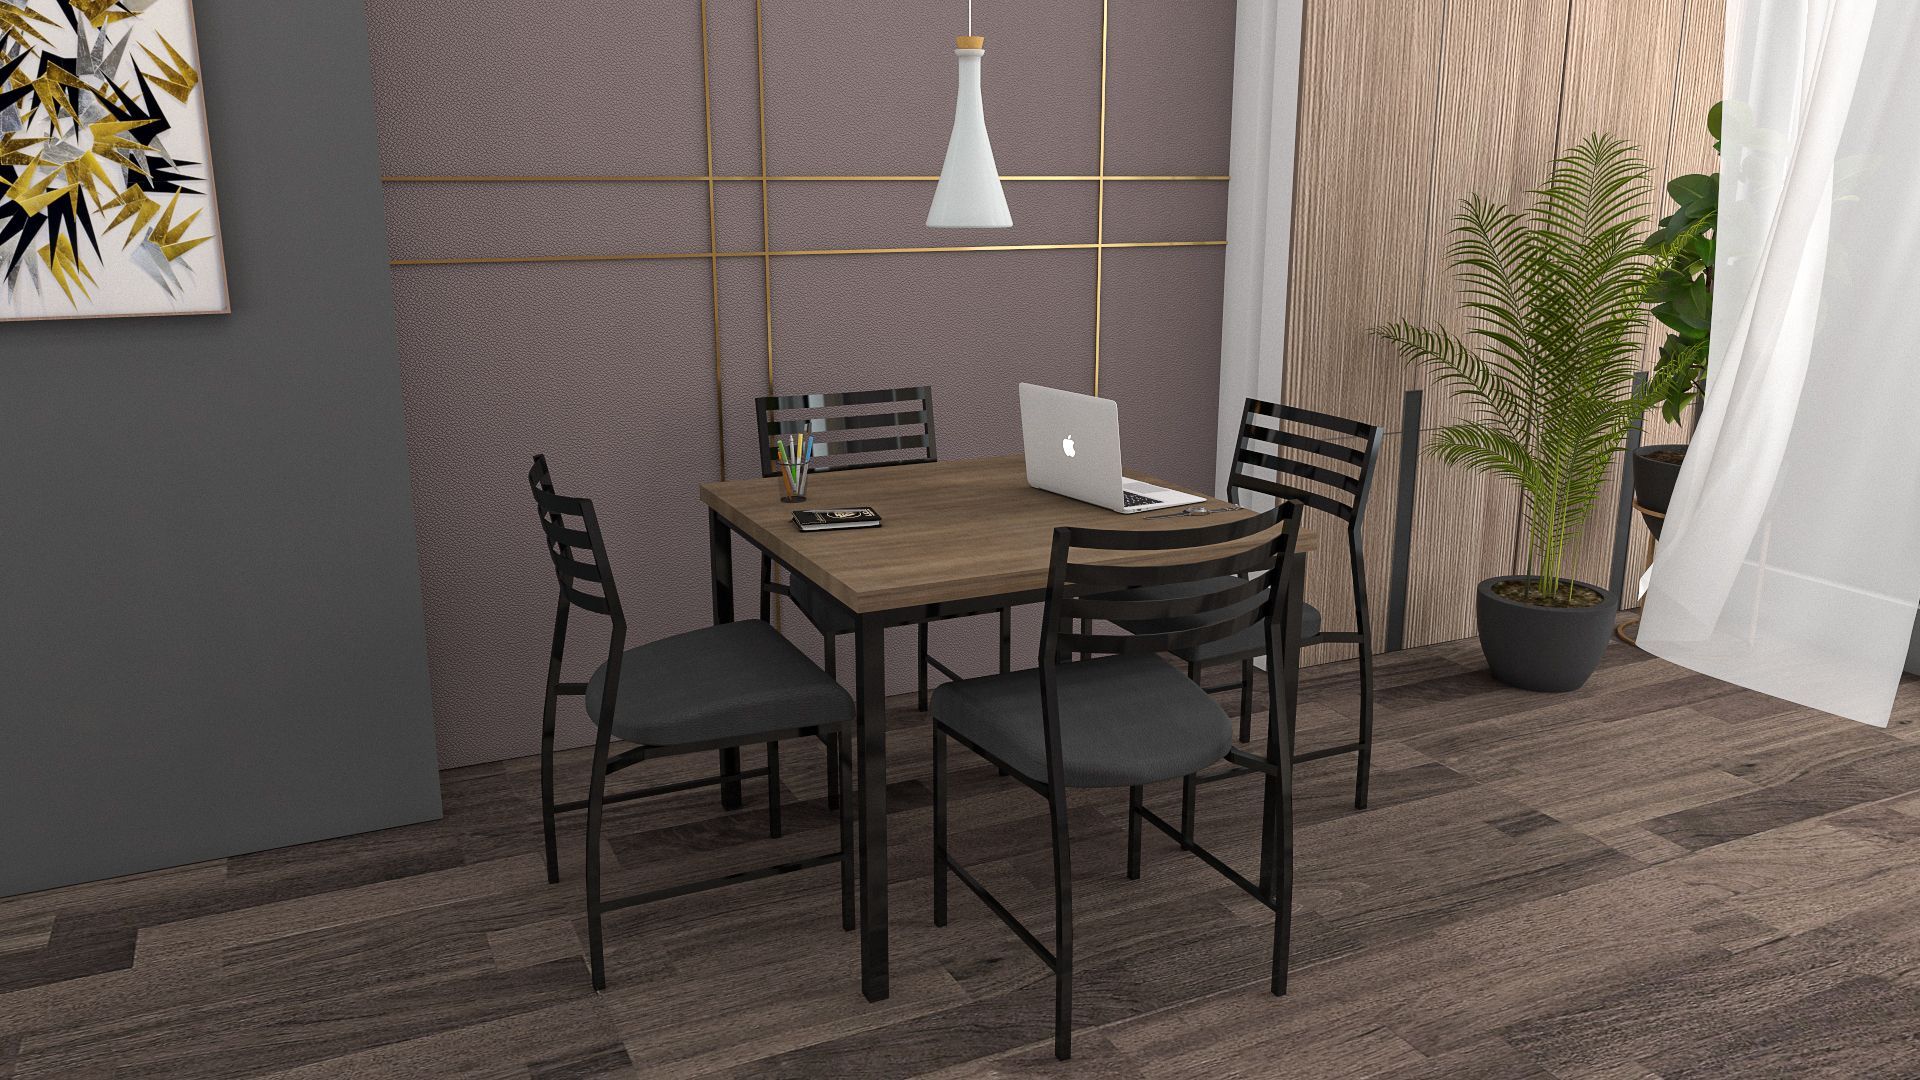 Dining Rooms available in a variety of laminate colors and finishes combined with black or silver powder coated metal